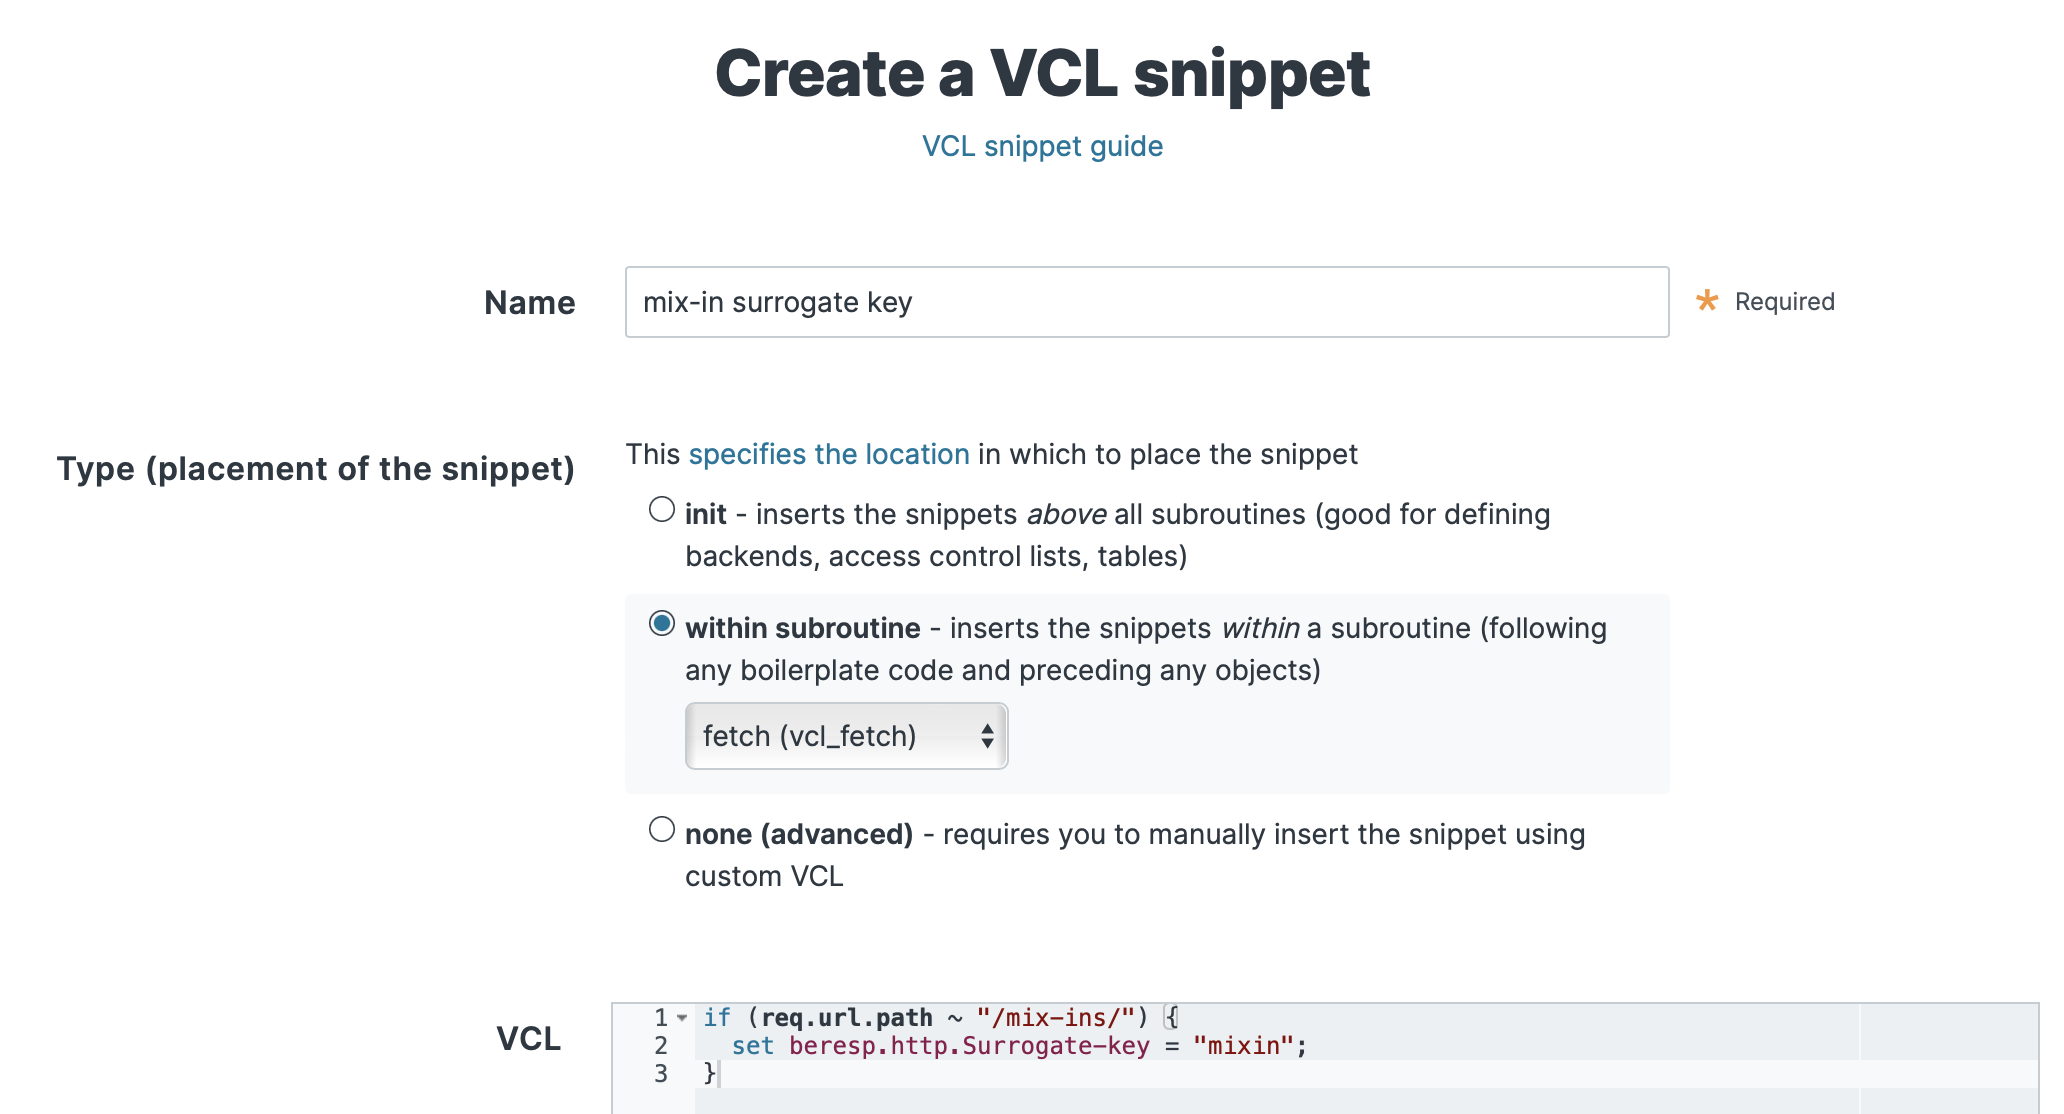 Creating the VCL snippet with the surrogate key